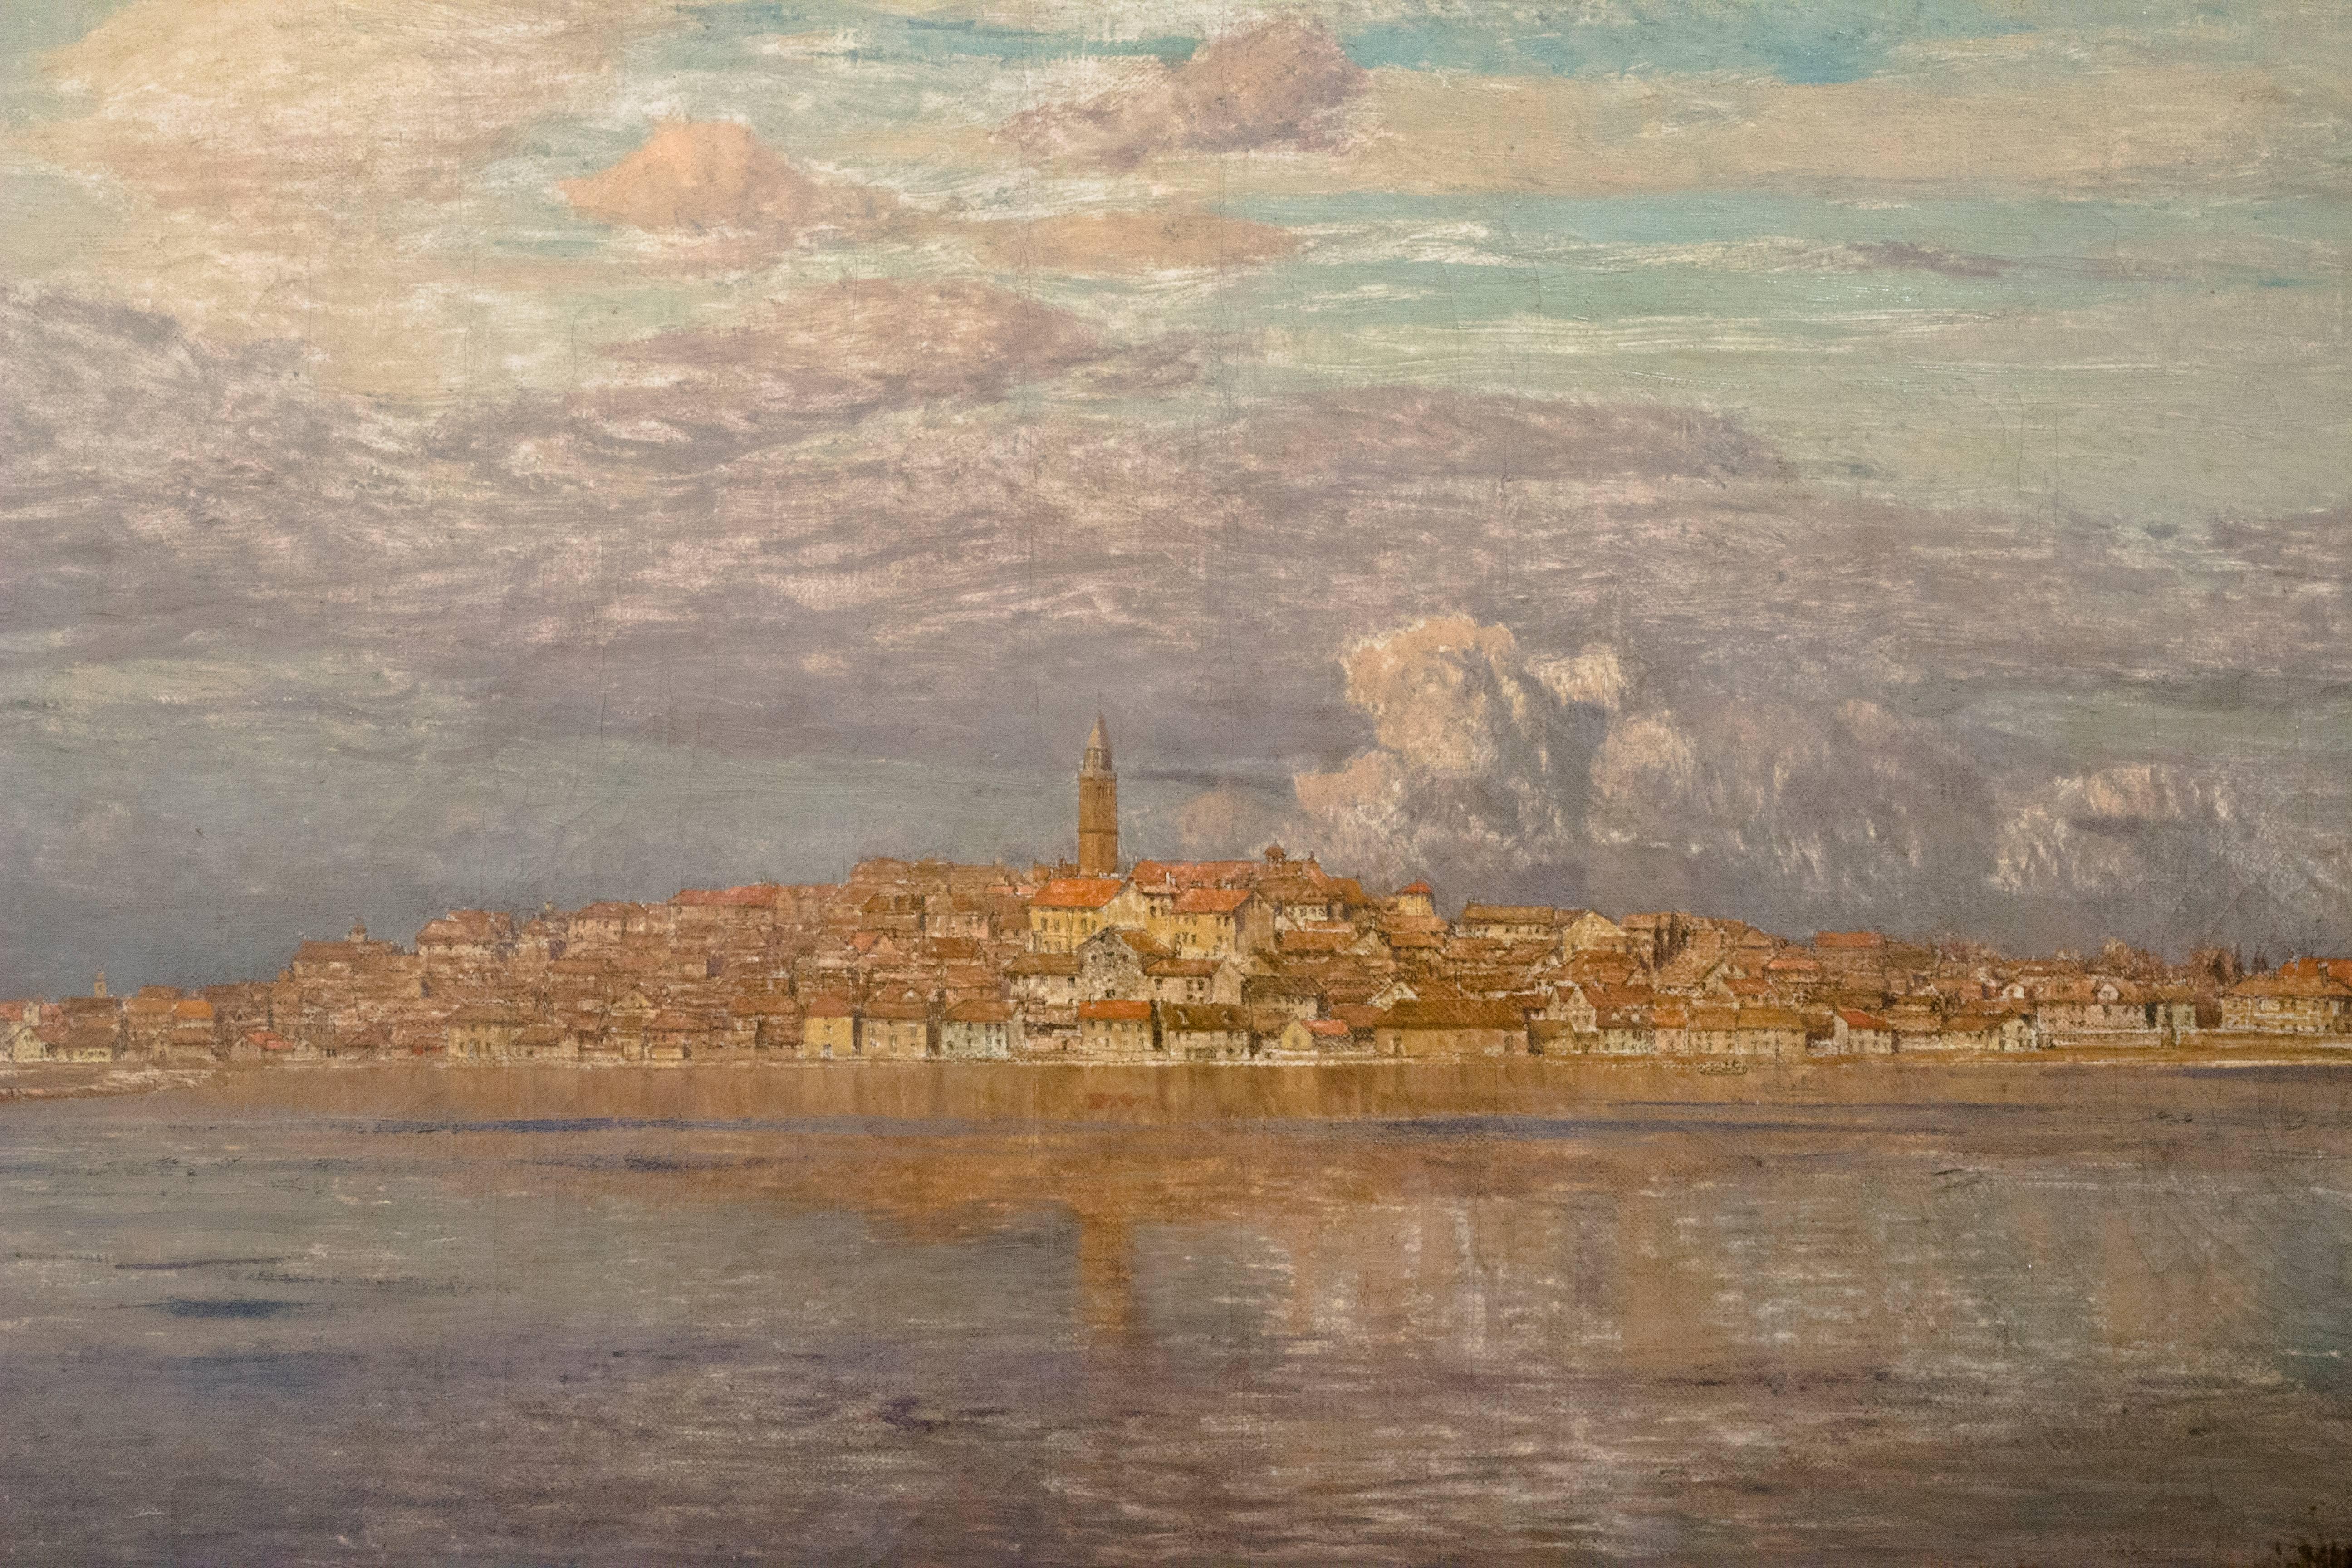 Capodistria/Koper, Slovenia, dated 1918 - Painting by Thomas Leitner